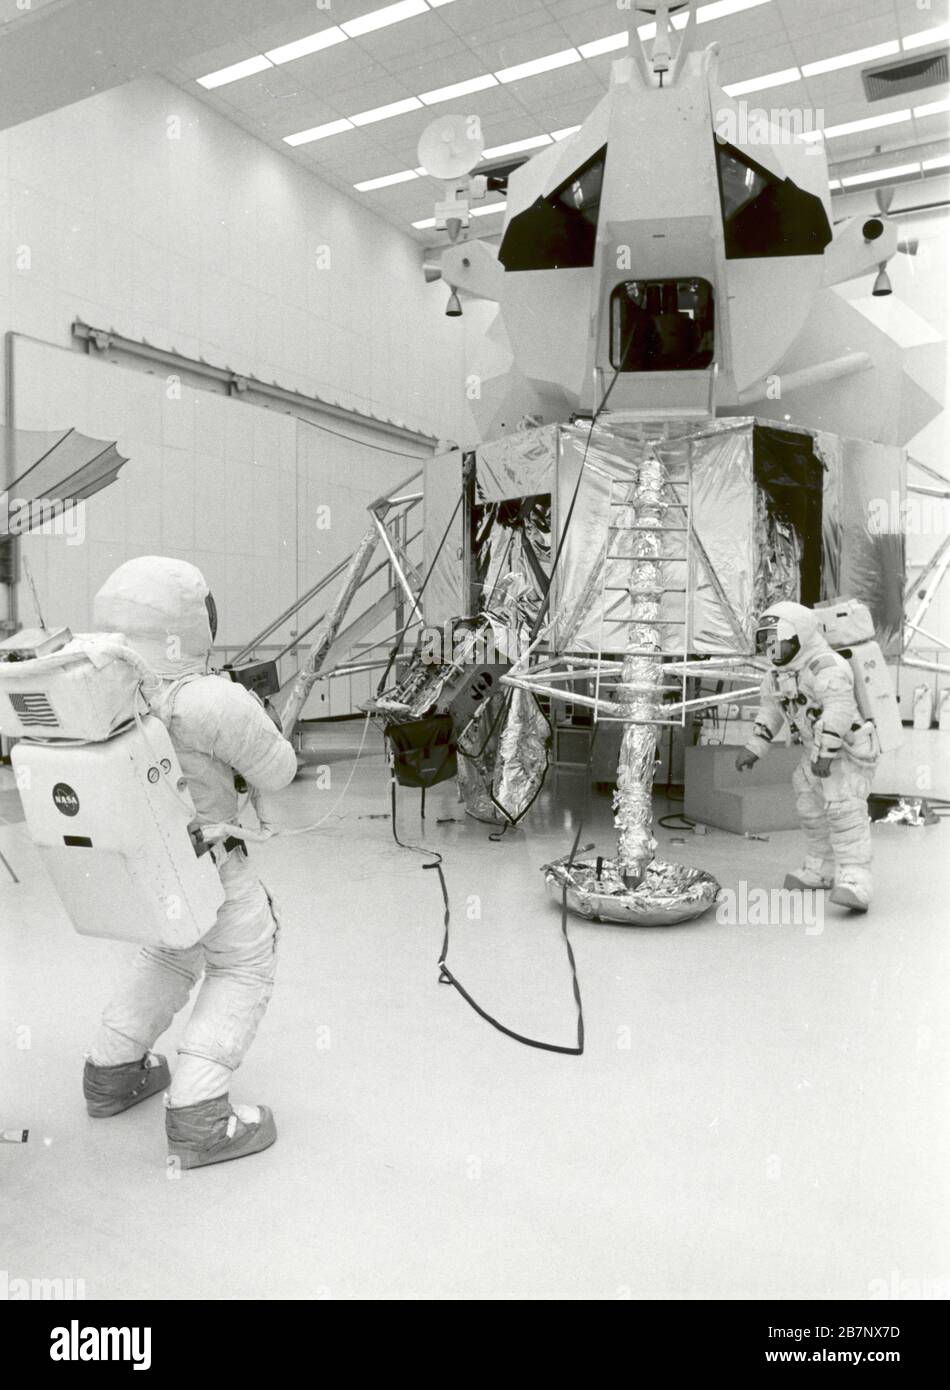 Apollo 13 - NASA, 1970. Apollo 13 astronauts James A. Lovell and Fred W. Haise, Jr., during practice moonwalk at Kennedy Space Center, 1970. Stock Photo